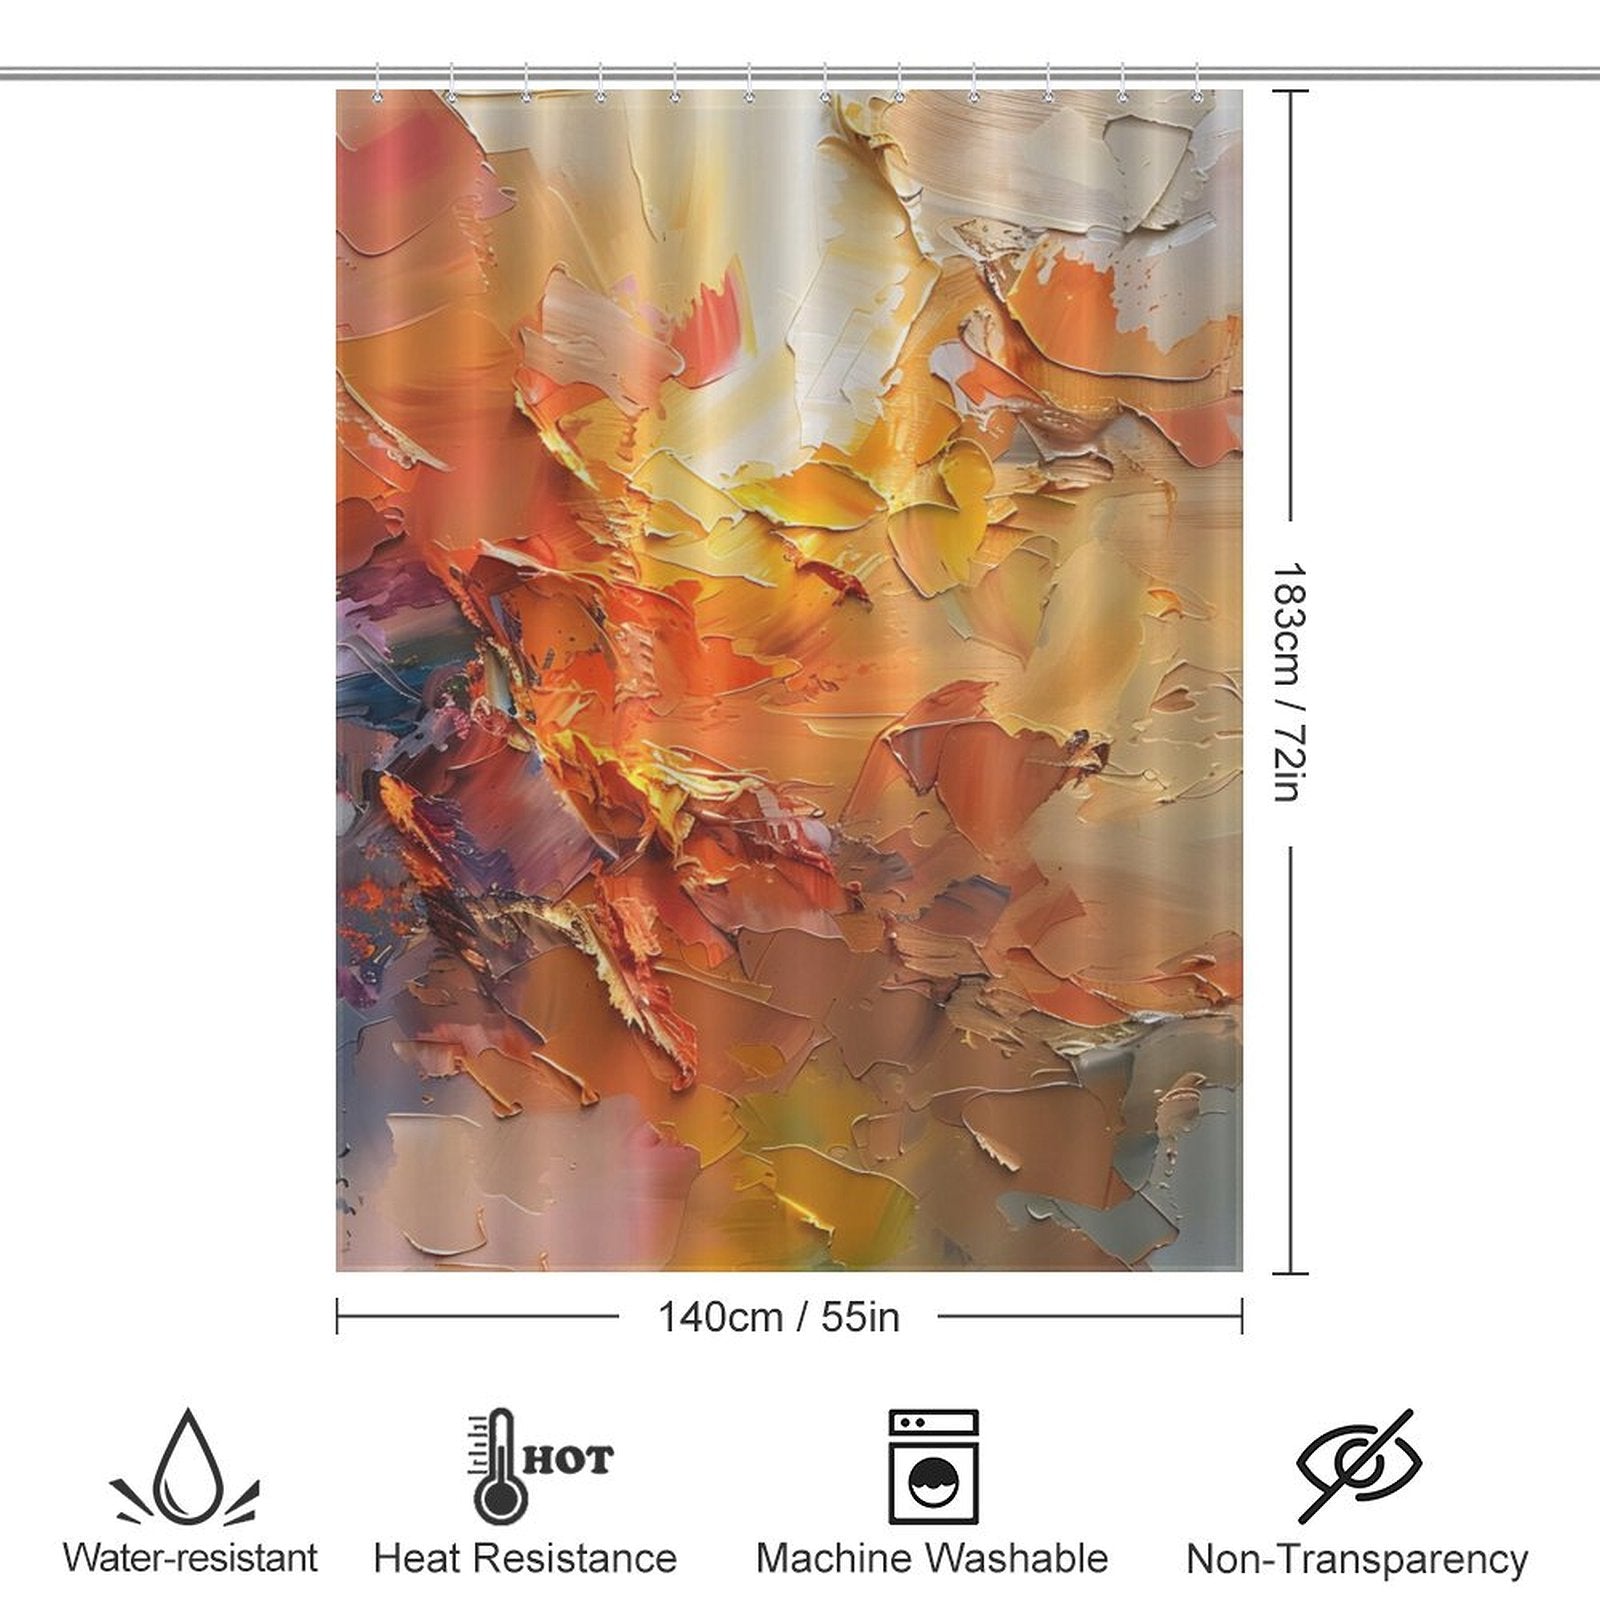 Cotton Cat Burnt Orange Abstract Oil Painting Modern Art Yellow Blue Brushstrokes Shower Curtain measuring 183 cm by 140 cm. Features include water resistance, heat resistance, machine washability, and non-transparency.